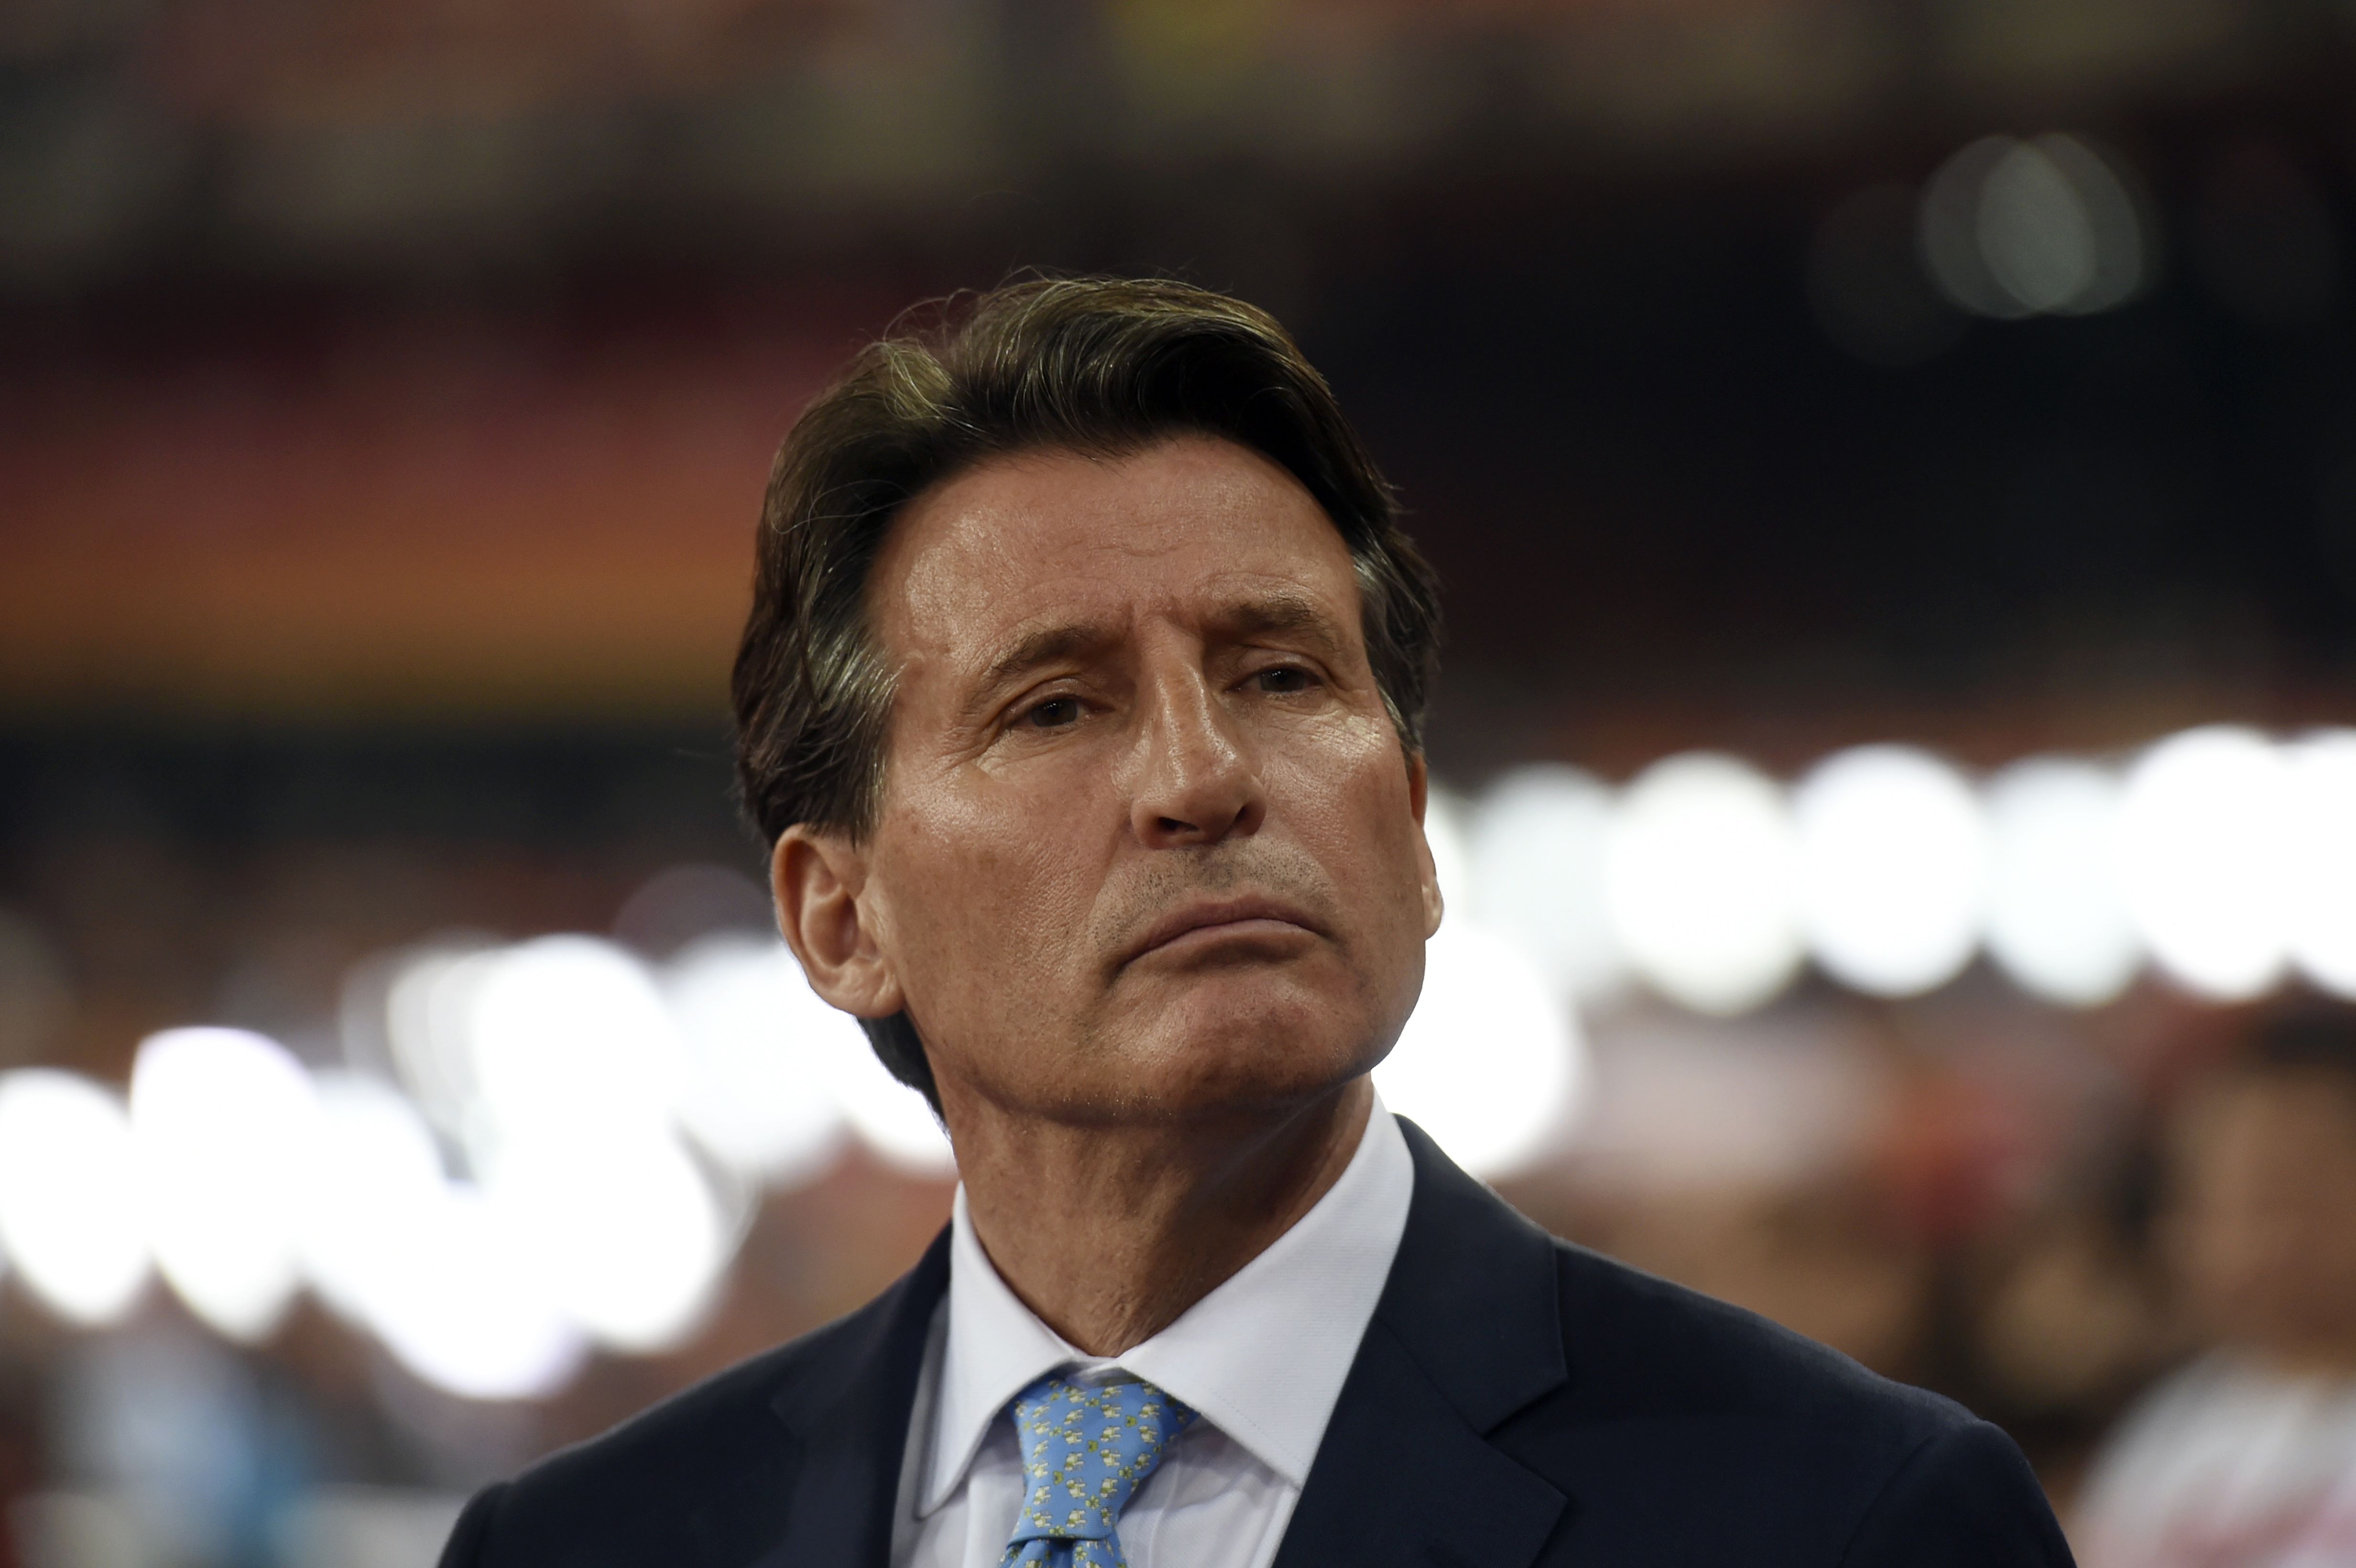 (FILES) -- A file photo taken on August 30, 2015 shows IAAF president Sebastian Coe presenting medals for the women's marathon athletics event at the 2015 IAAF World Championships at the "Bird's Nest" National Stadium in Beijing. Coe has denied allegations of a conflict of interest over his ties with Nike and his role in the 2021 championships being awarded to the sportswear company's home state. Coe, head of the International Association of Athletics Federations (IAAF), told the BBC on November 25, 2015: "I did not lobby anyone on behalf of the Eugene 2021 bid" in the US state of Oregon. AFP PHOTO / GREG BAKER